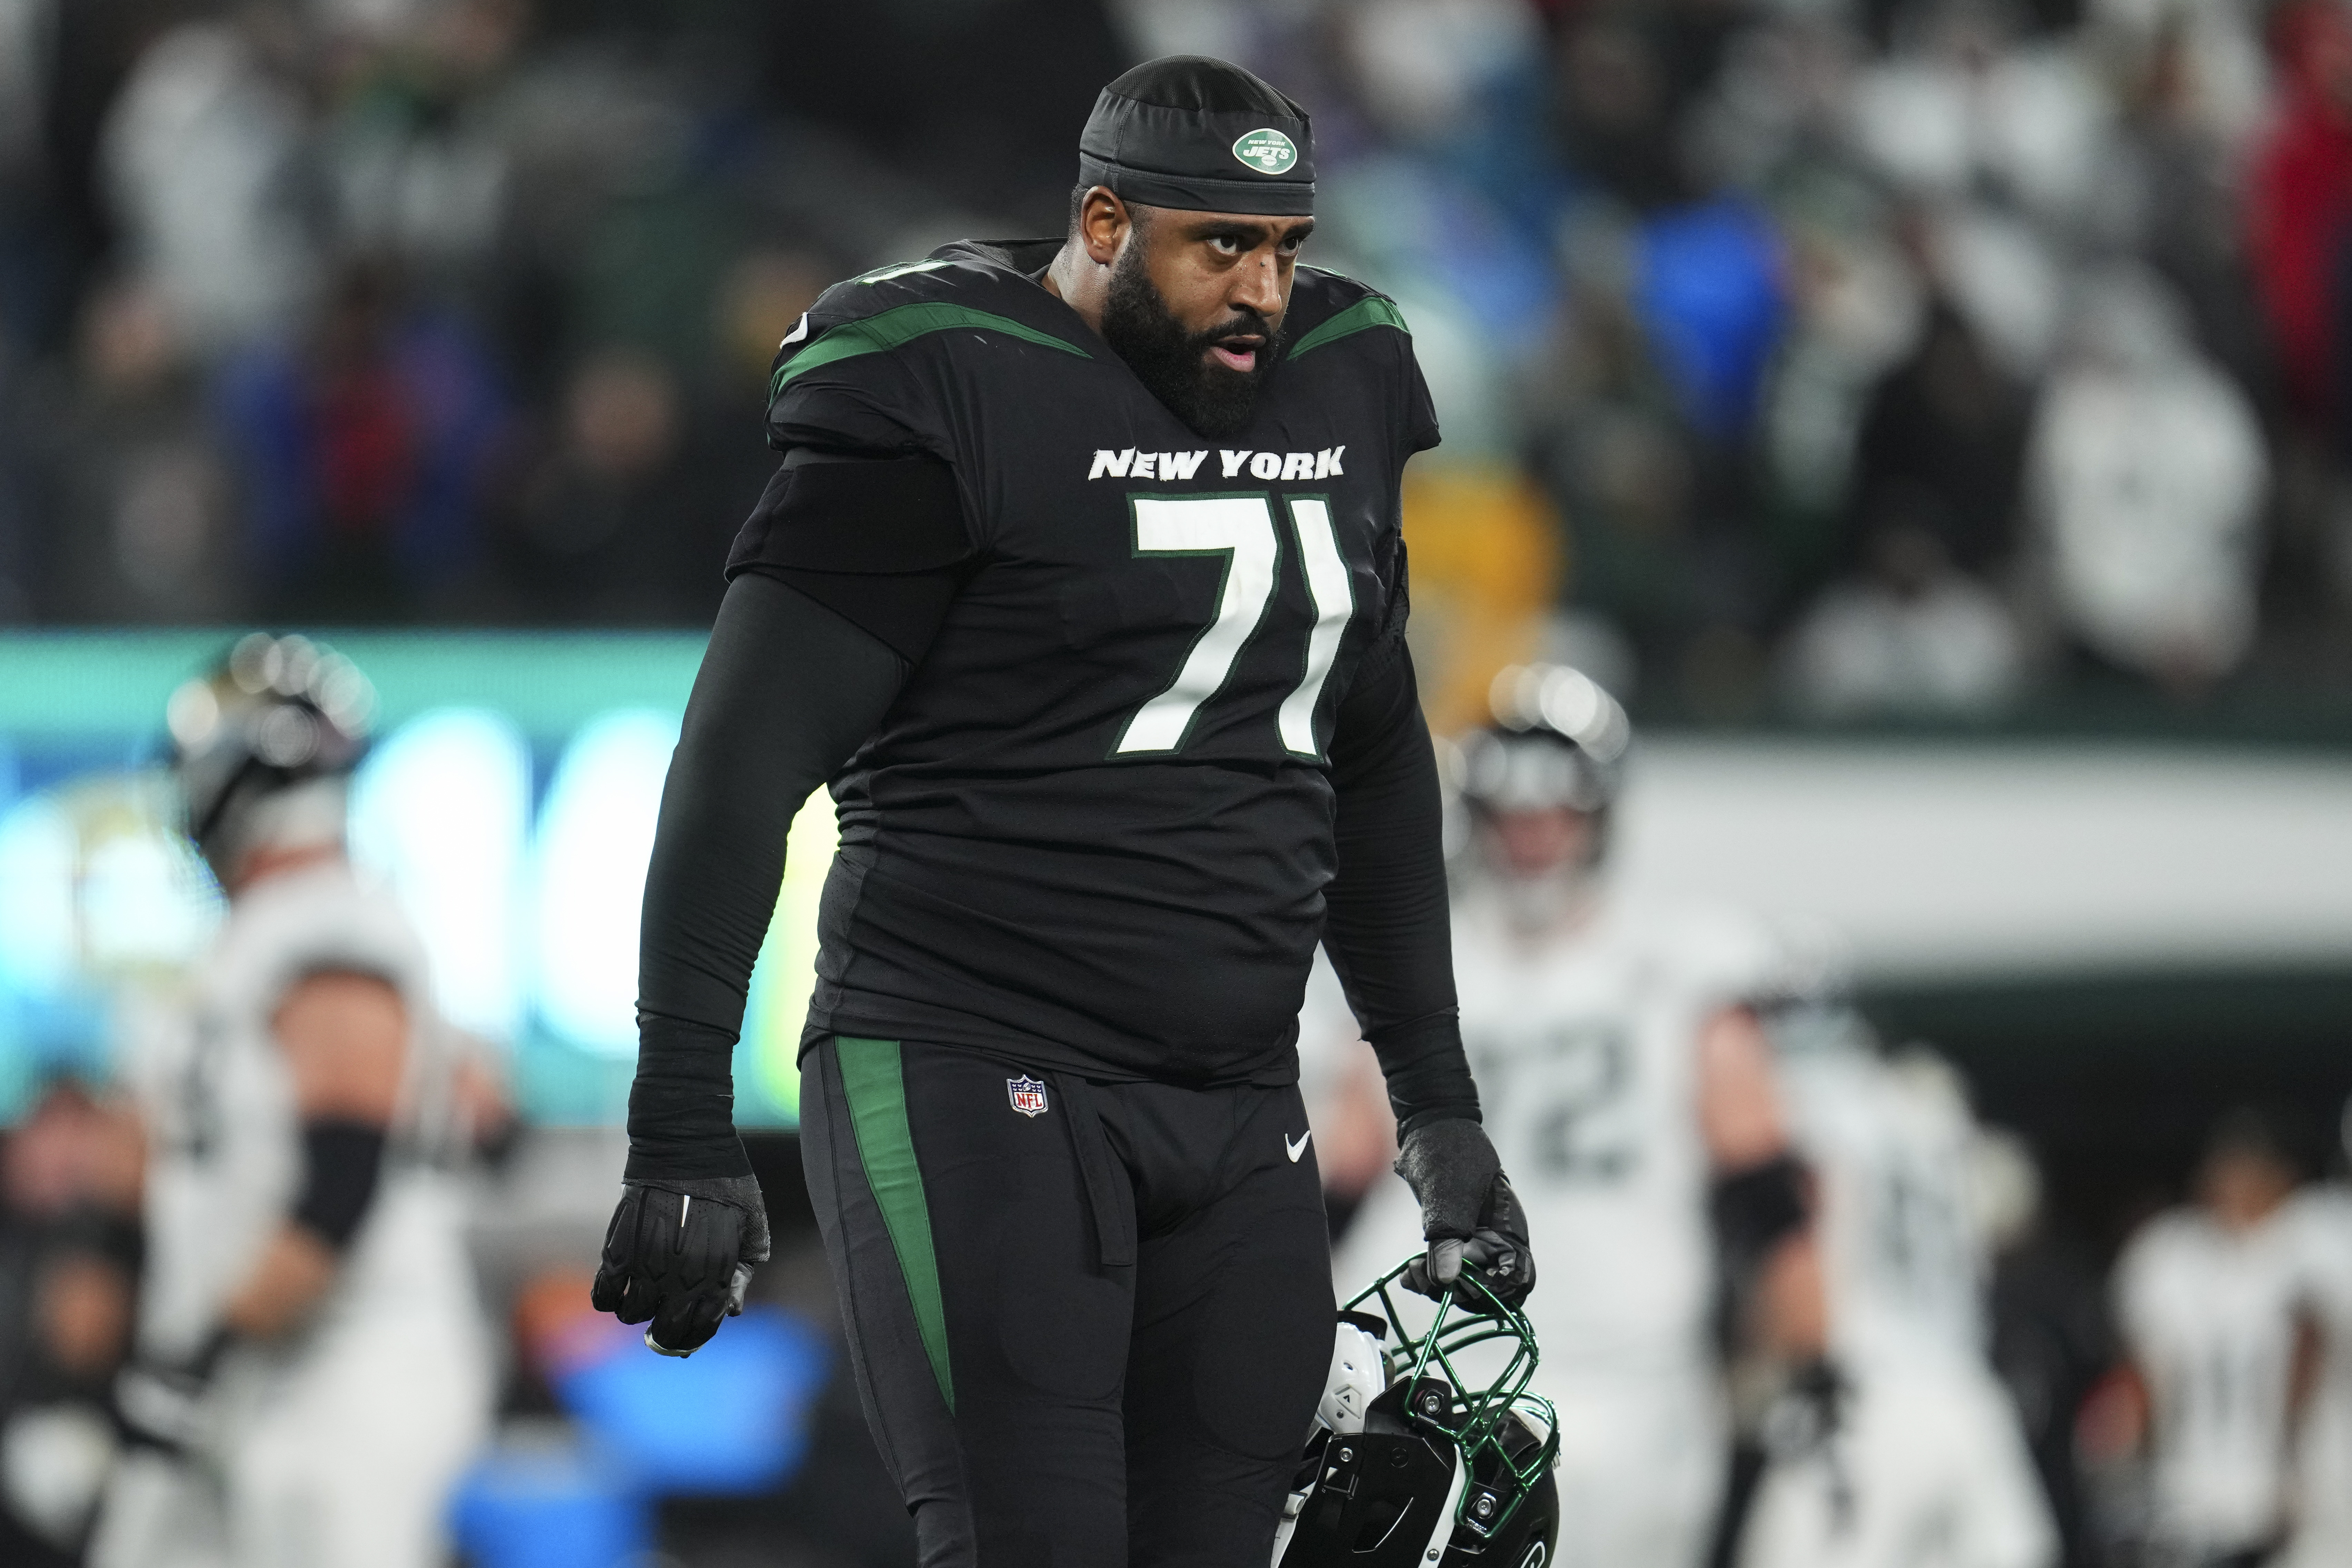 Left tackle Duane Brown of the New York Jets looks on in the game against the Jacksonville Jaguars at MetLife Stadium in East Rutherford, New Jersey, December 22, 2022. /CFP